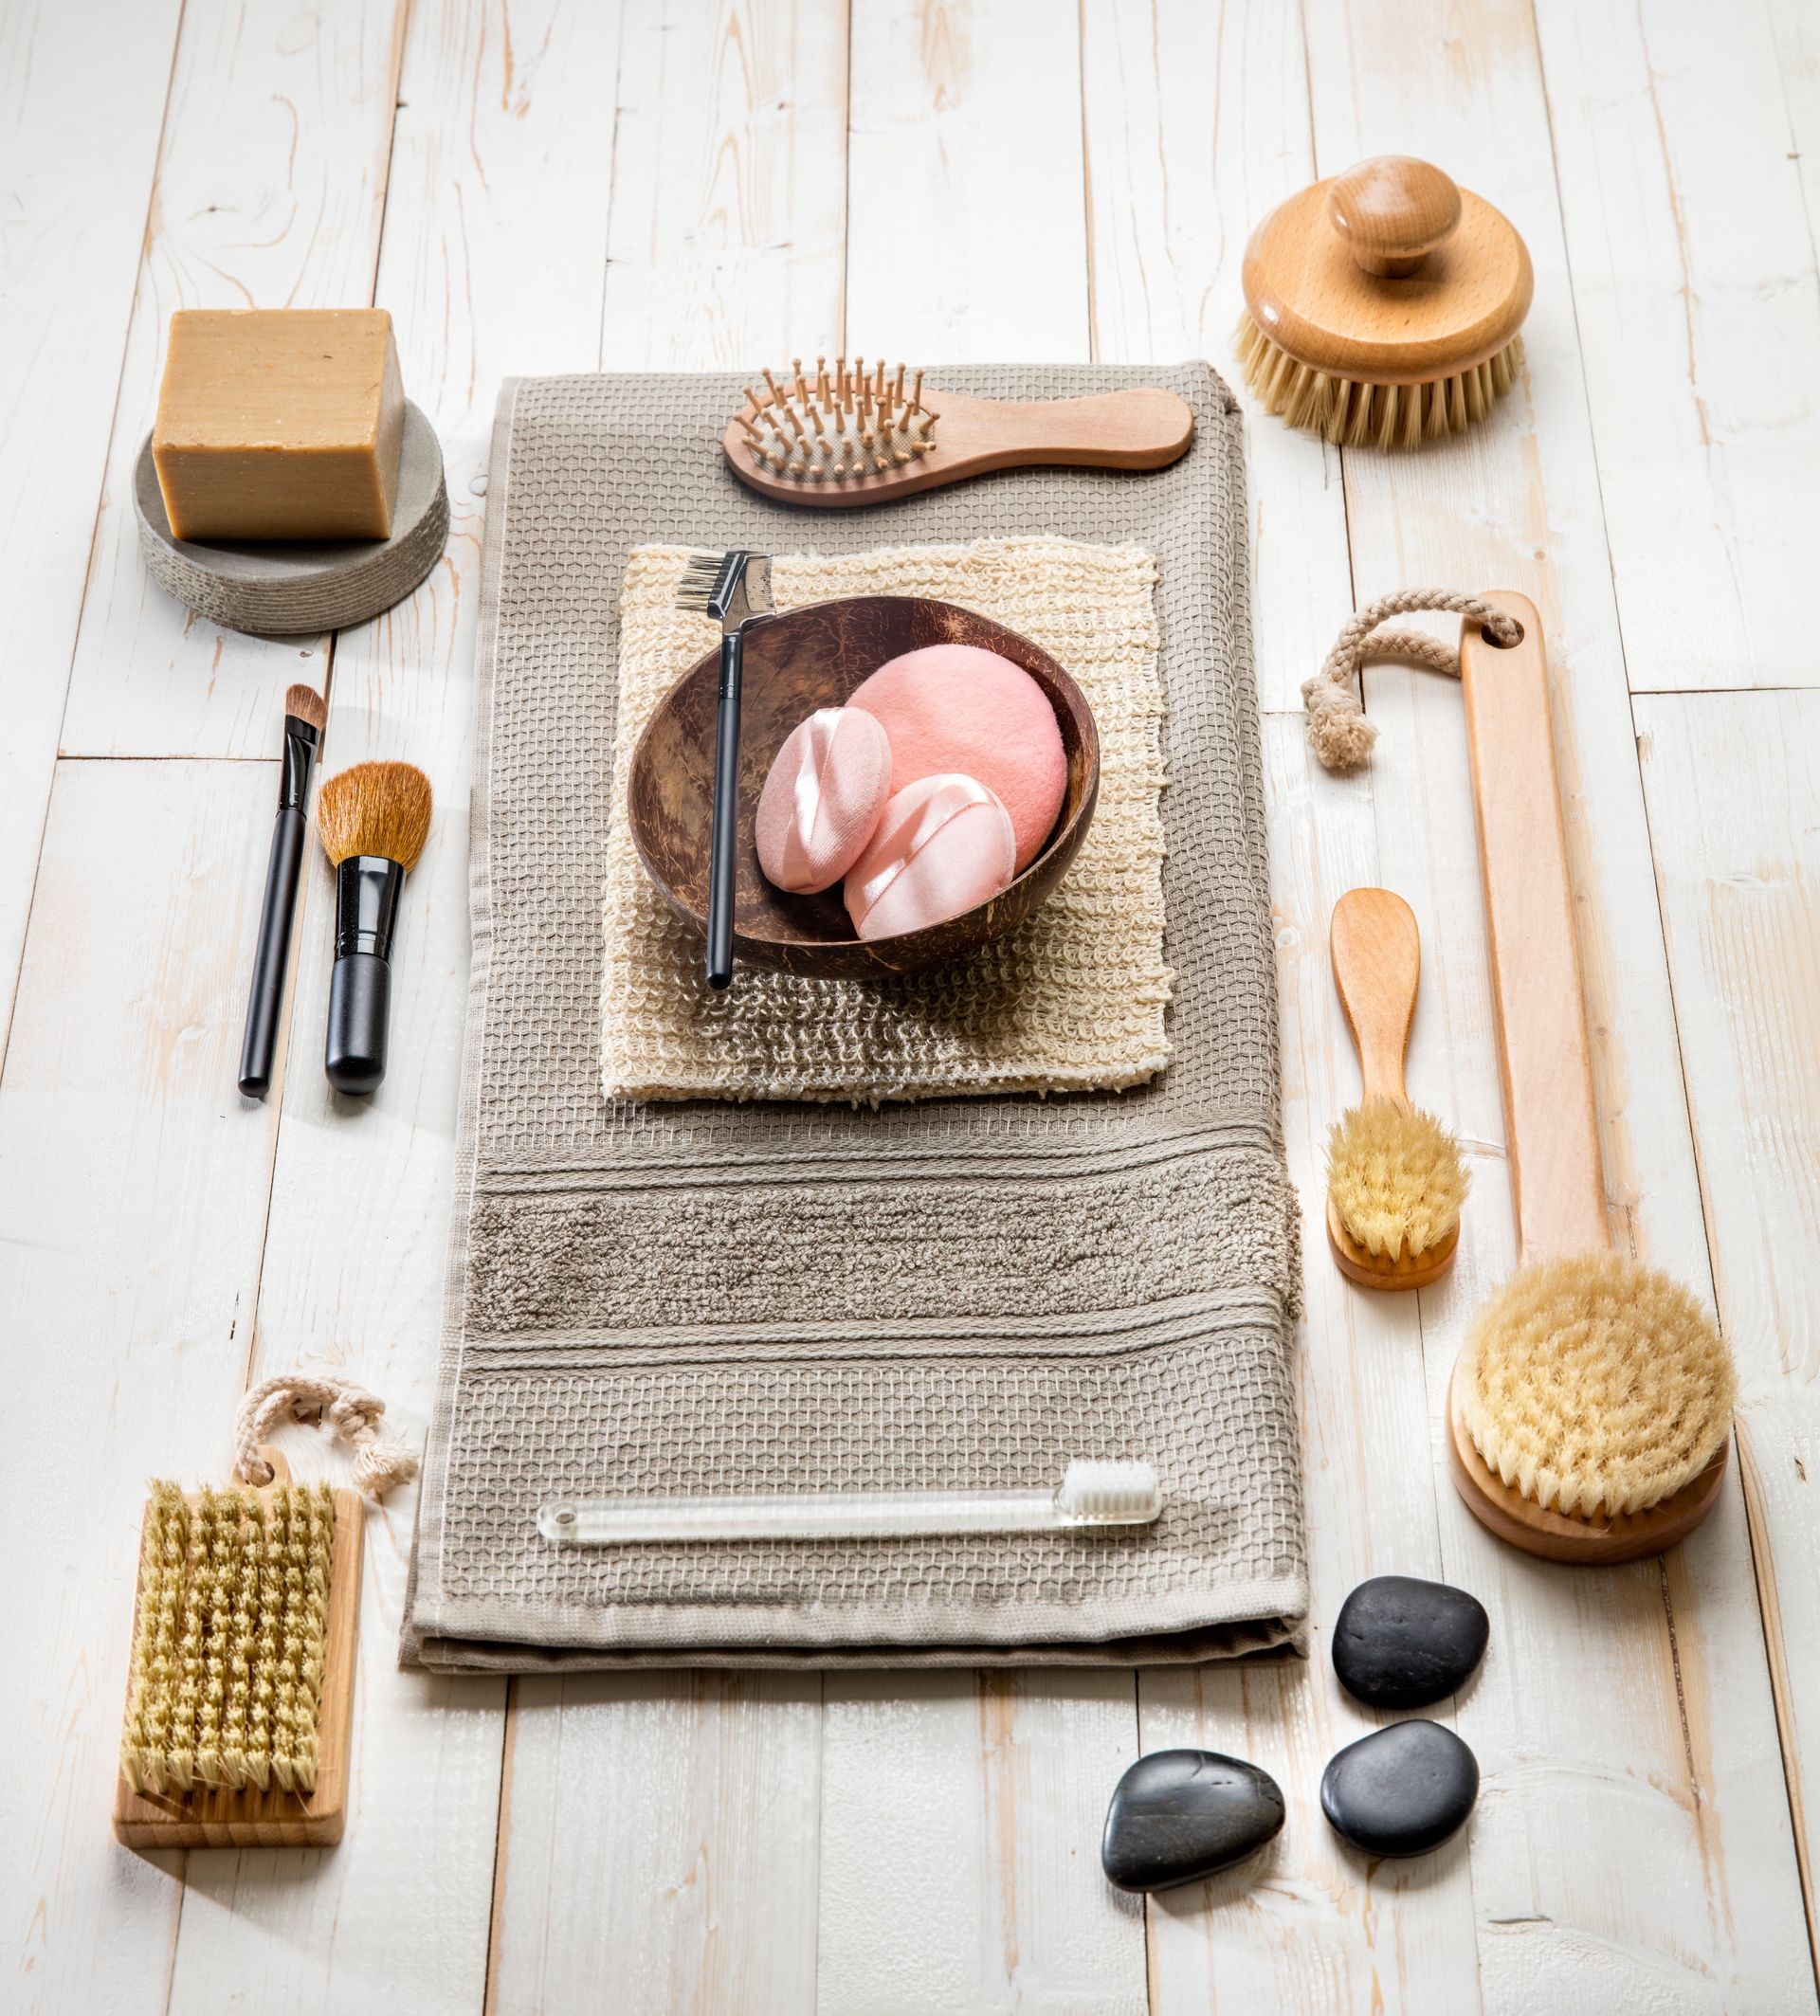 Dry Brushing: A Great Way to Support Your Body's Detoxification Process